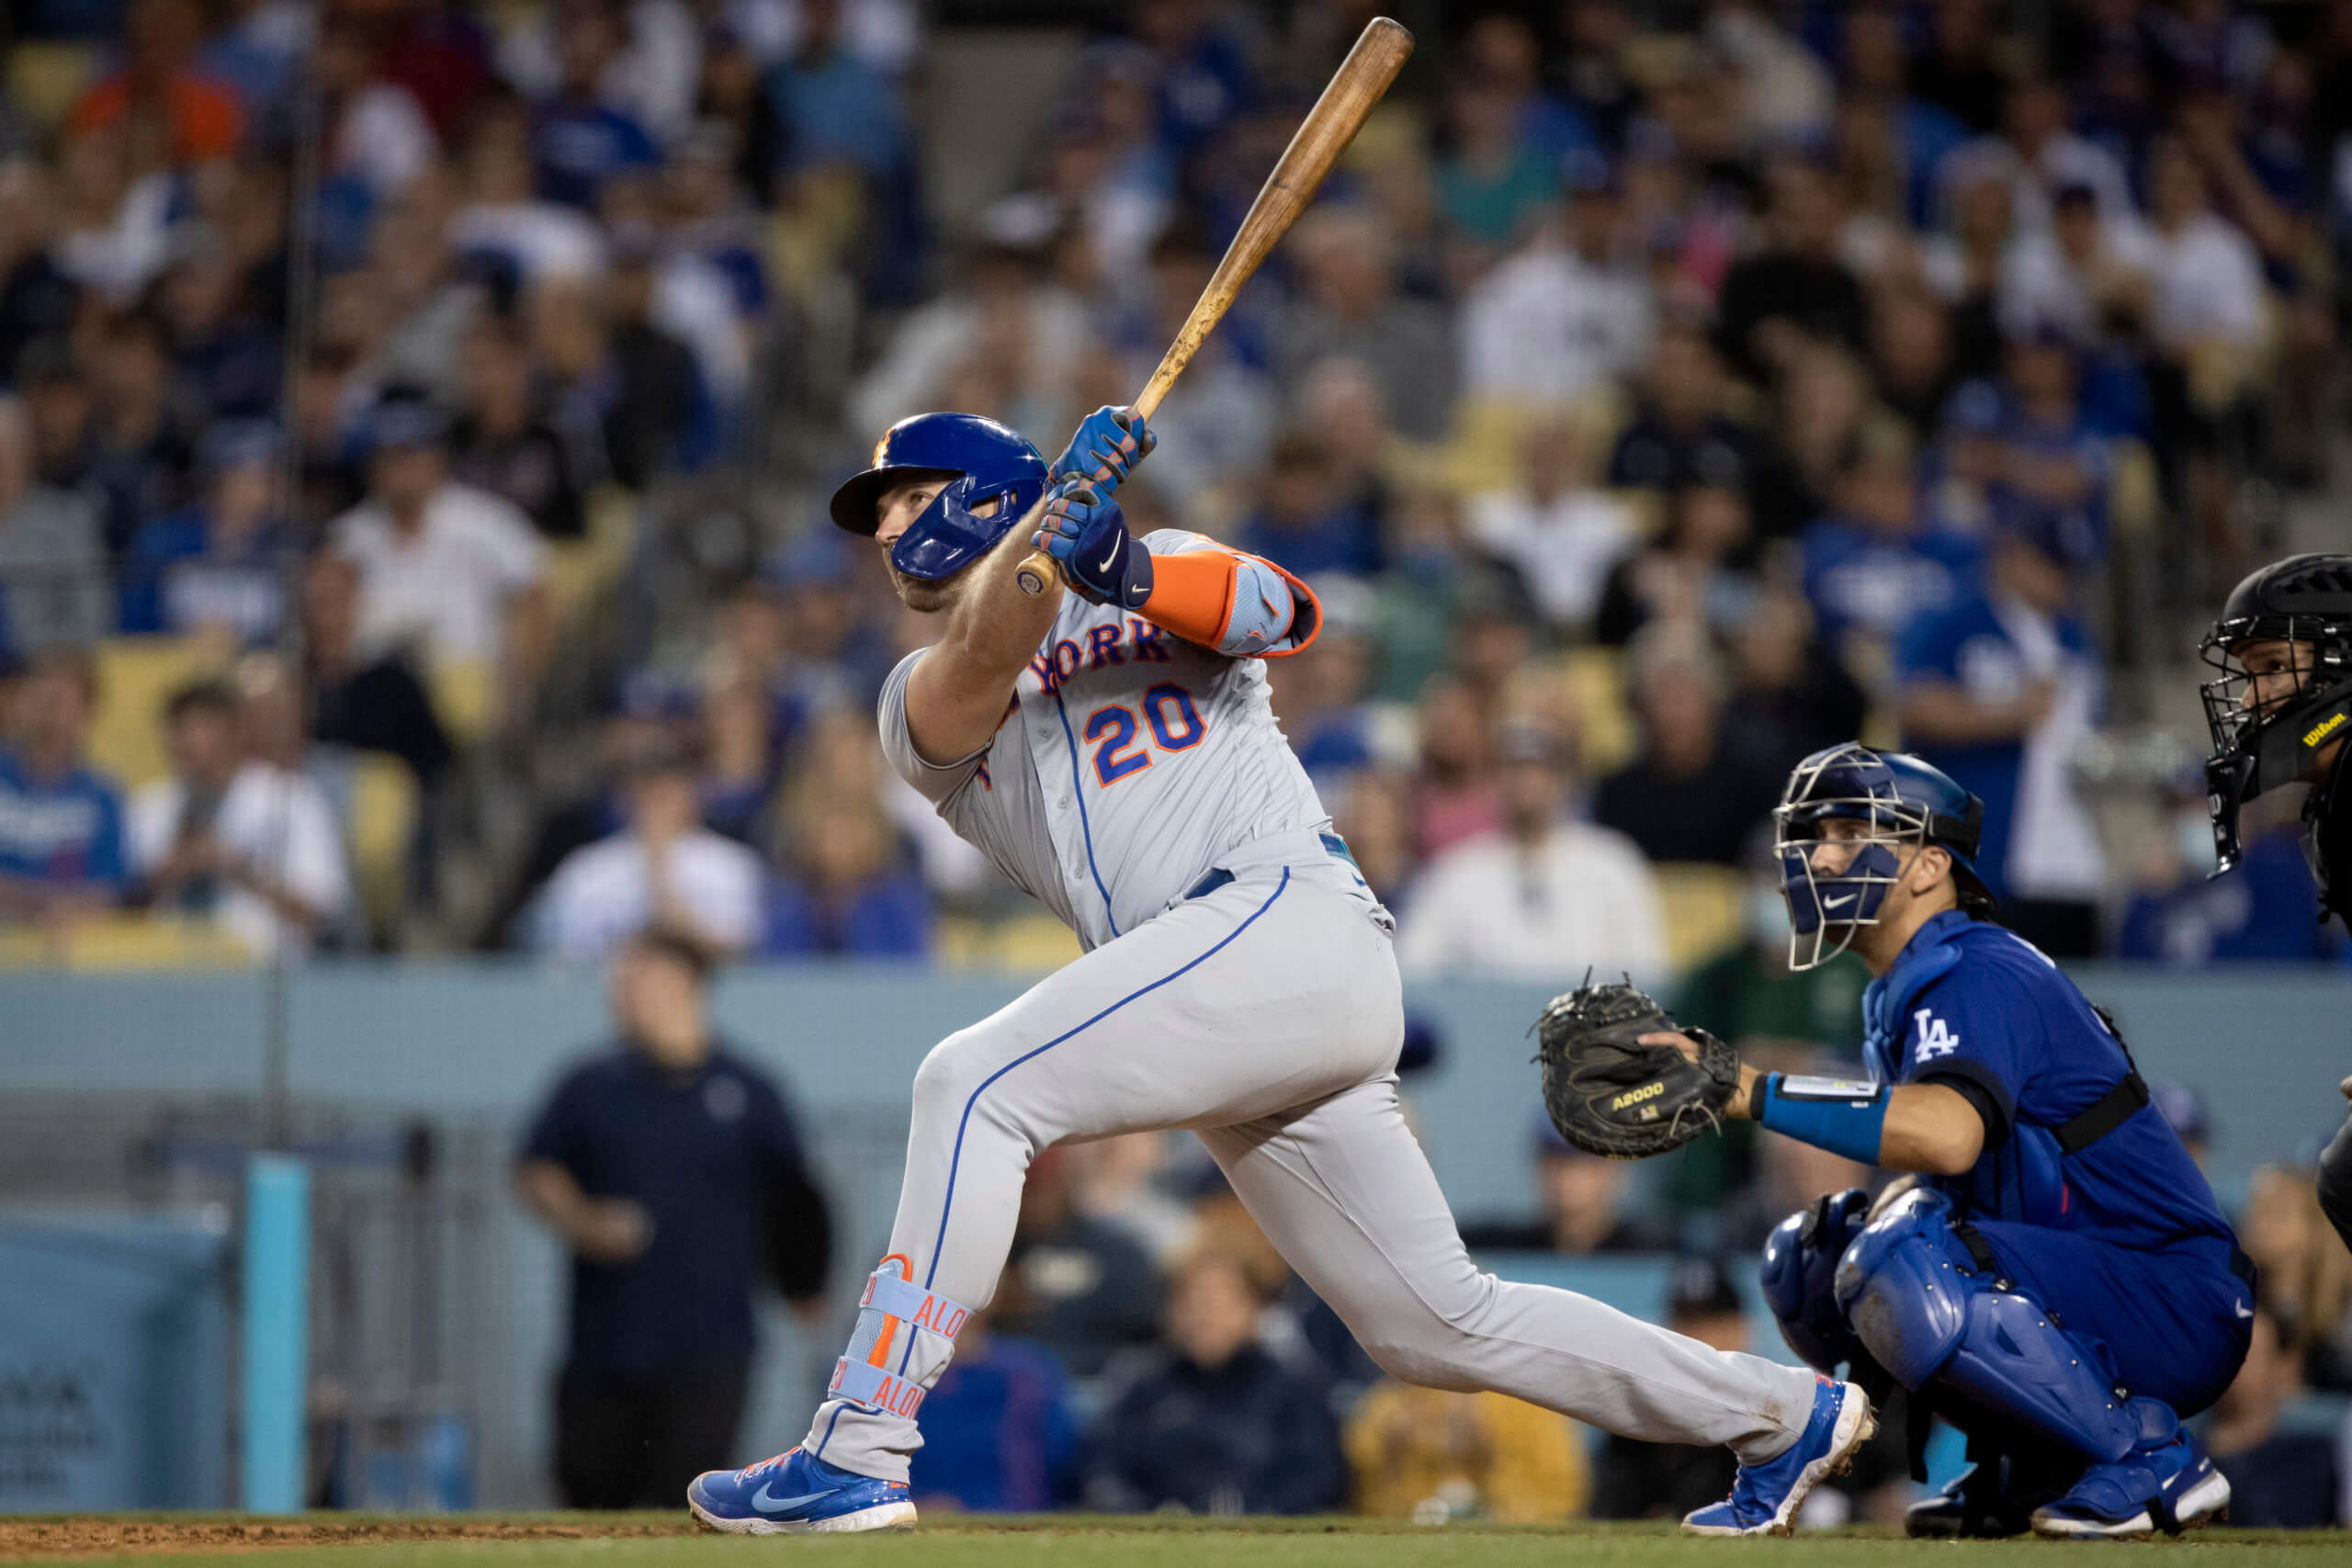 Projecting a Pete Alonso Contract Extension